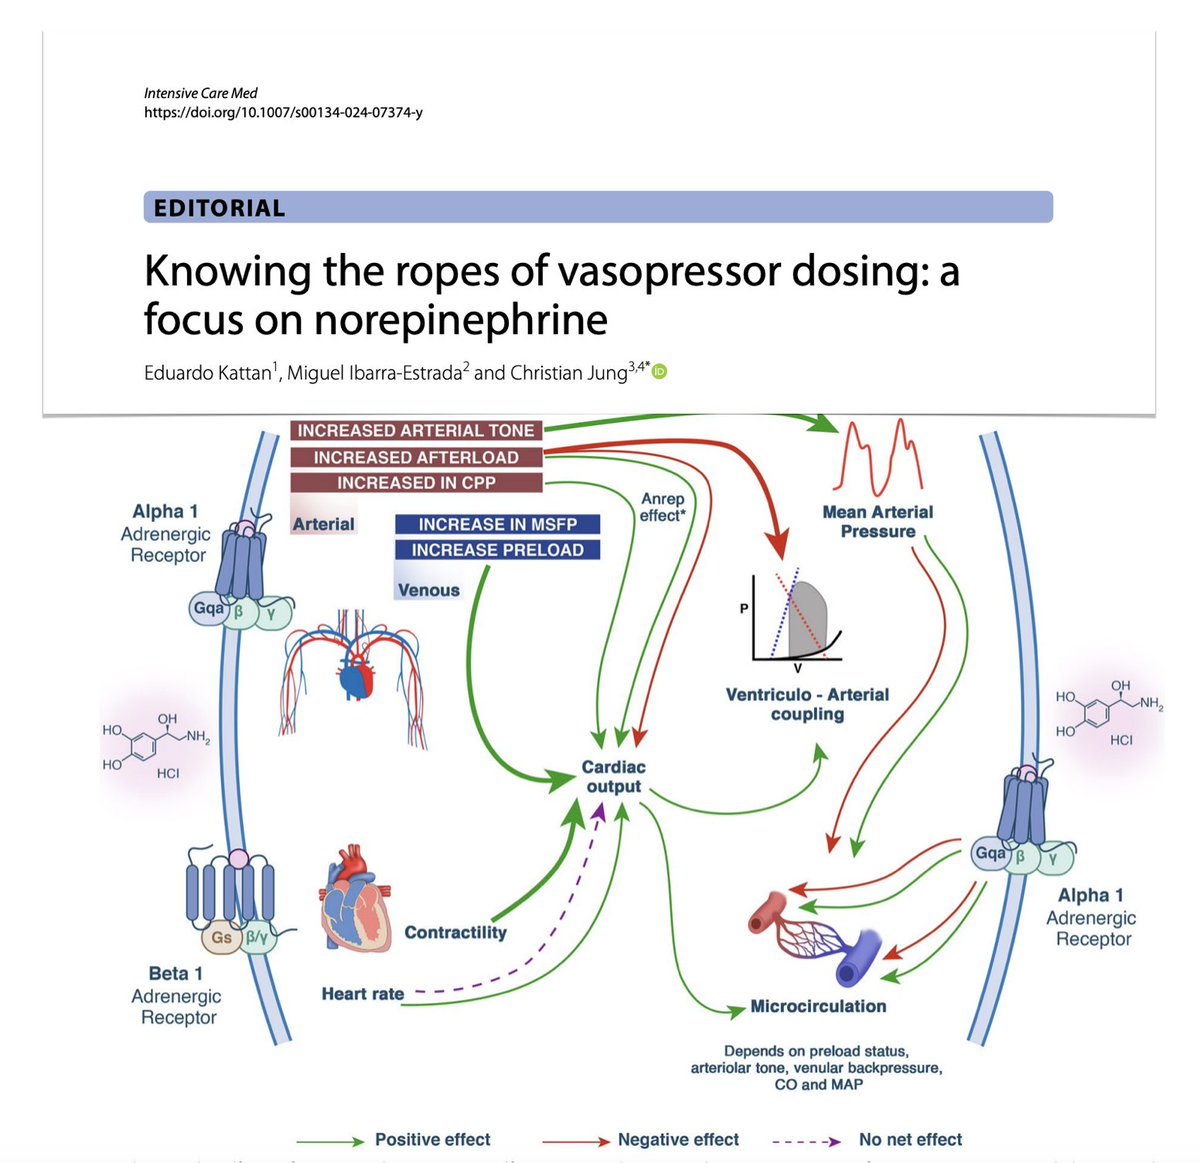 Vasopressors? Focus on norepinephrine 💉pharmacological properties 💉current dosing strategies Consensus of definitions needed (ie refractory shock or high-dose vasopressors) as equivalences between drugs (catecholaminergic/non) to facilitate comparisons 🔓rdcu.be/dBHs4